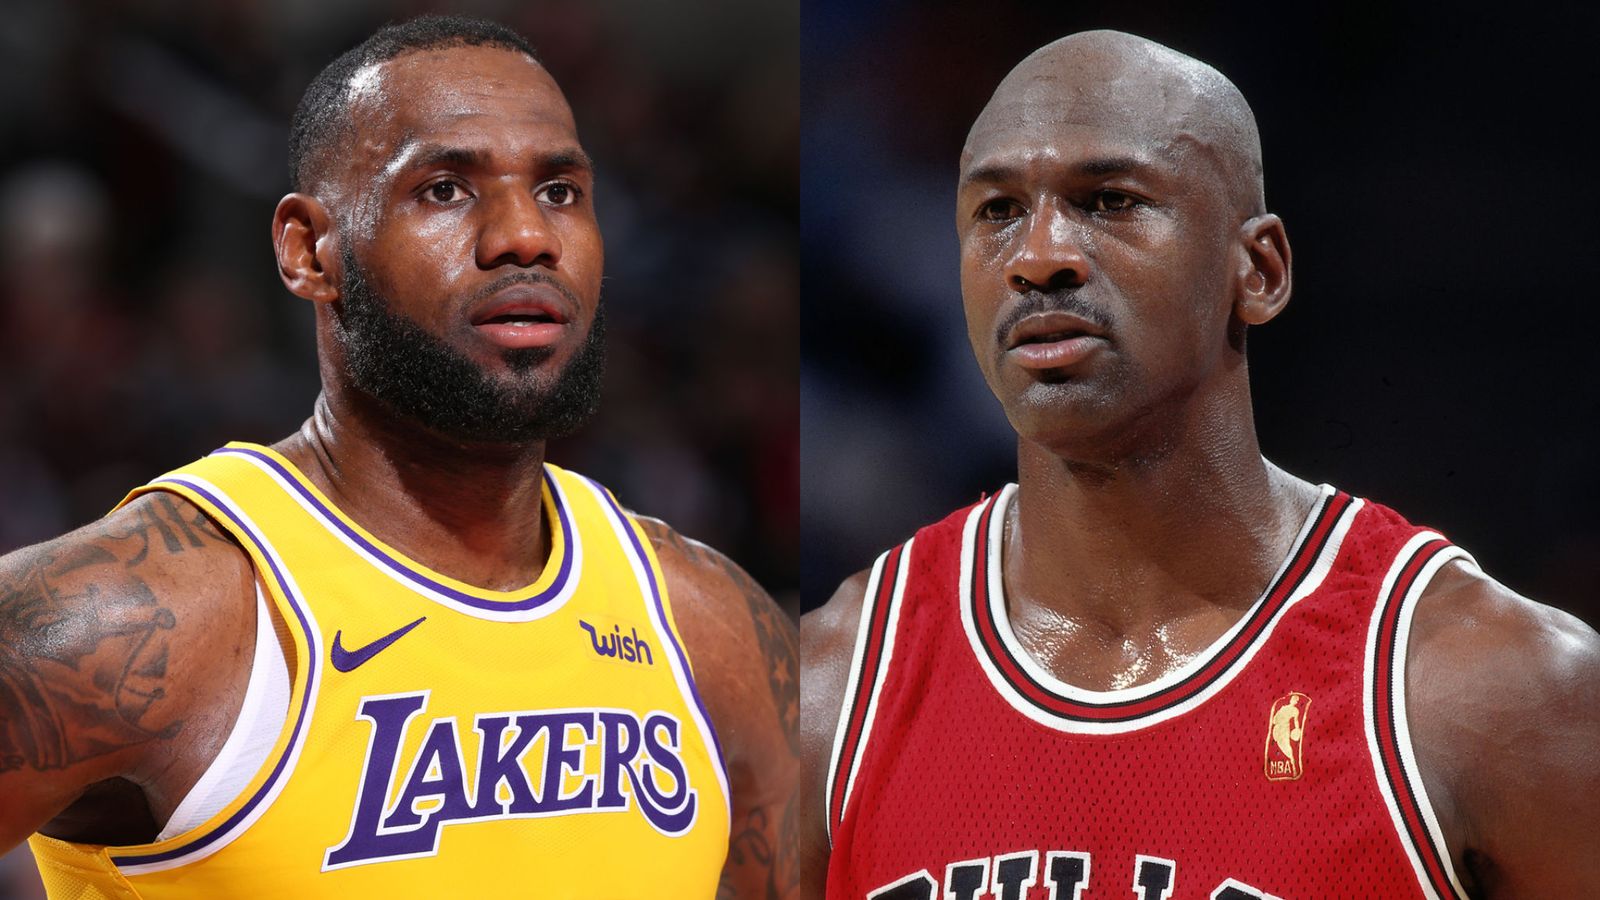 diagonal Acuario Bungalow Draymond Green says the LeBron James vs. Michael Jordan debate is 'bulls-t'  and offers an interesting new perspective - Lakers Daily